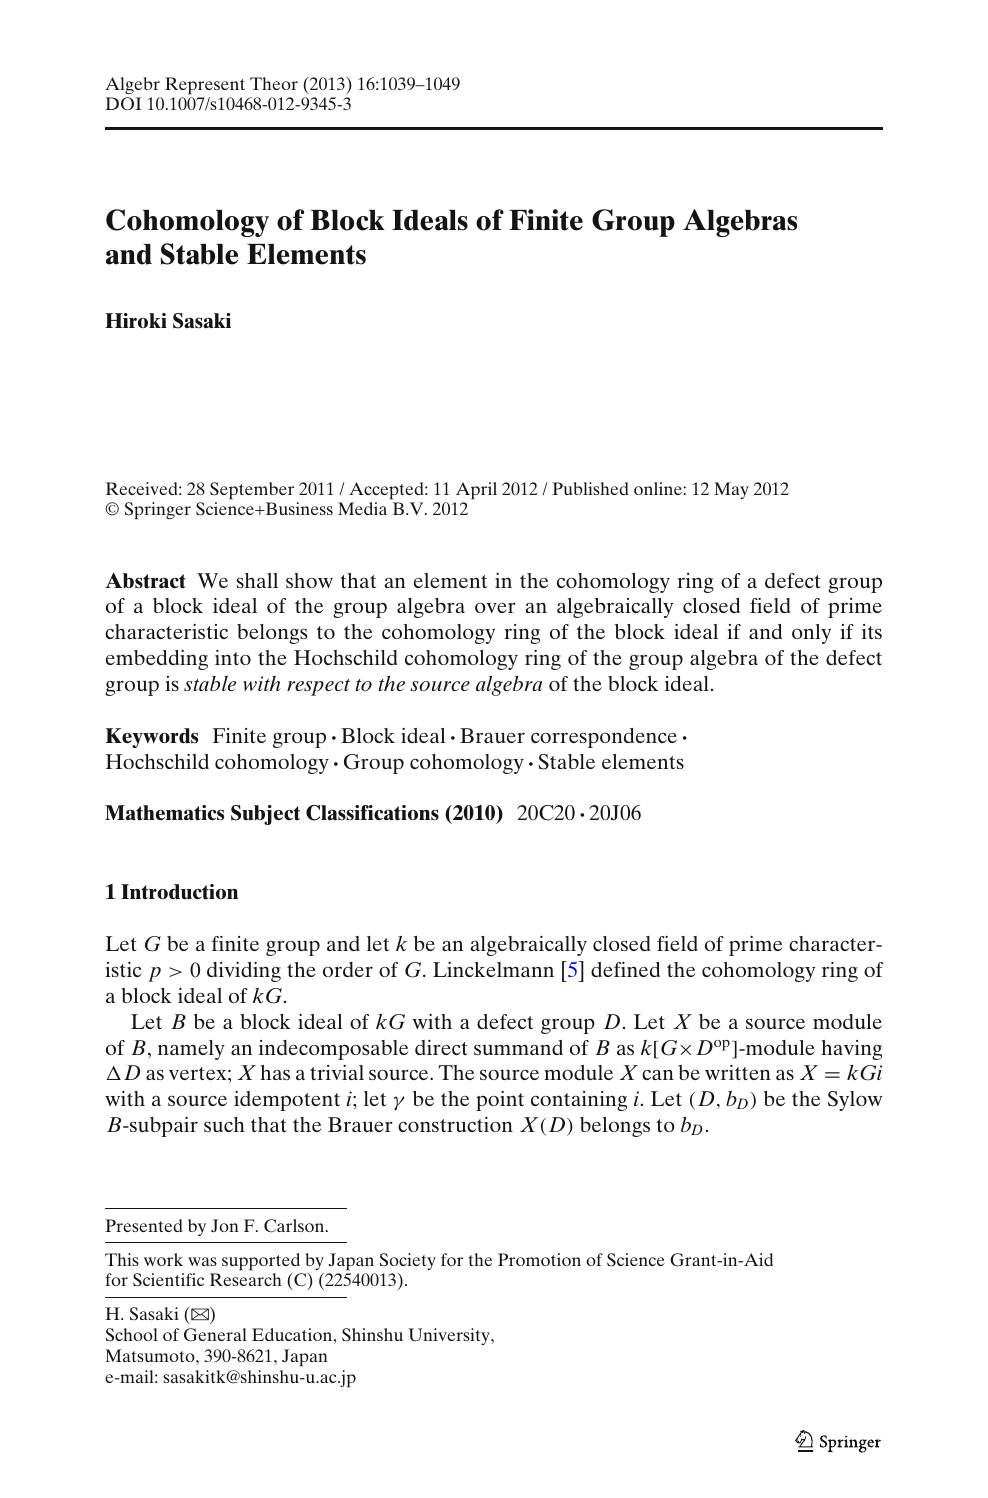 Cohomology Of Block Ideals Of Finite Group Algebras And Stable Elements Topic Of Research Paper In Physical Sciences Download Scholarly Article Pdf And Read For Free On Cyberleninka Open Science Hub